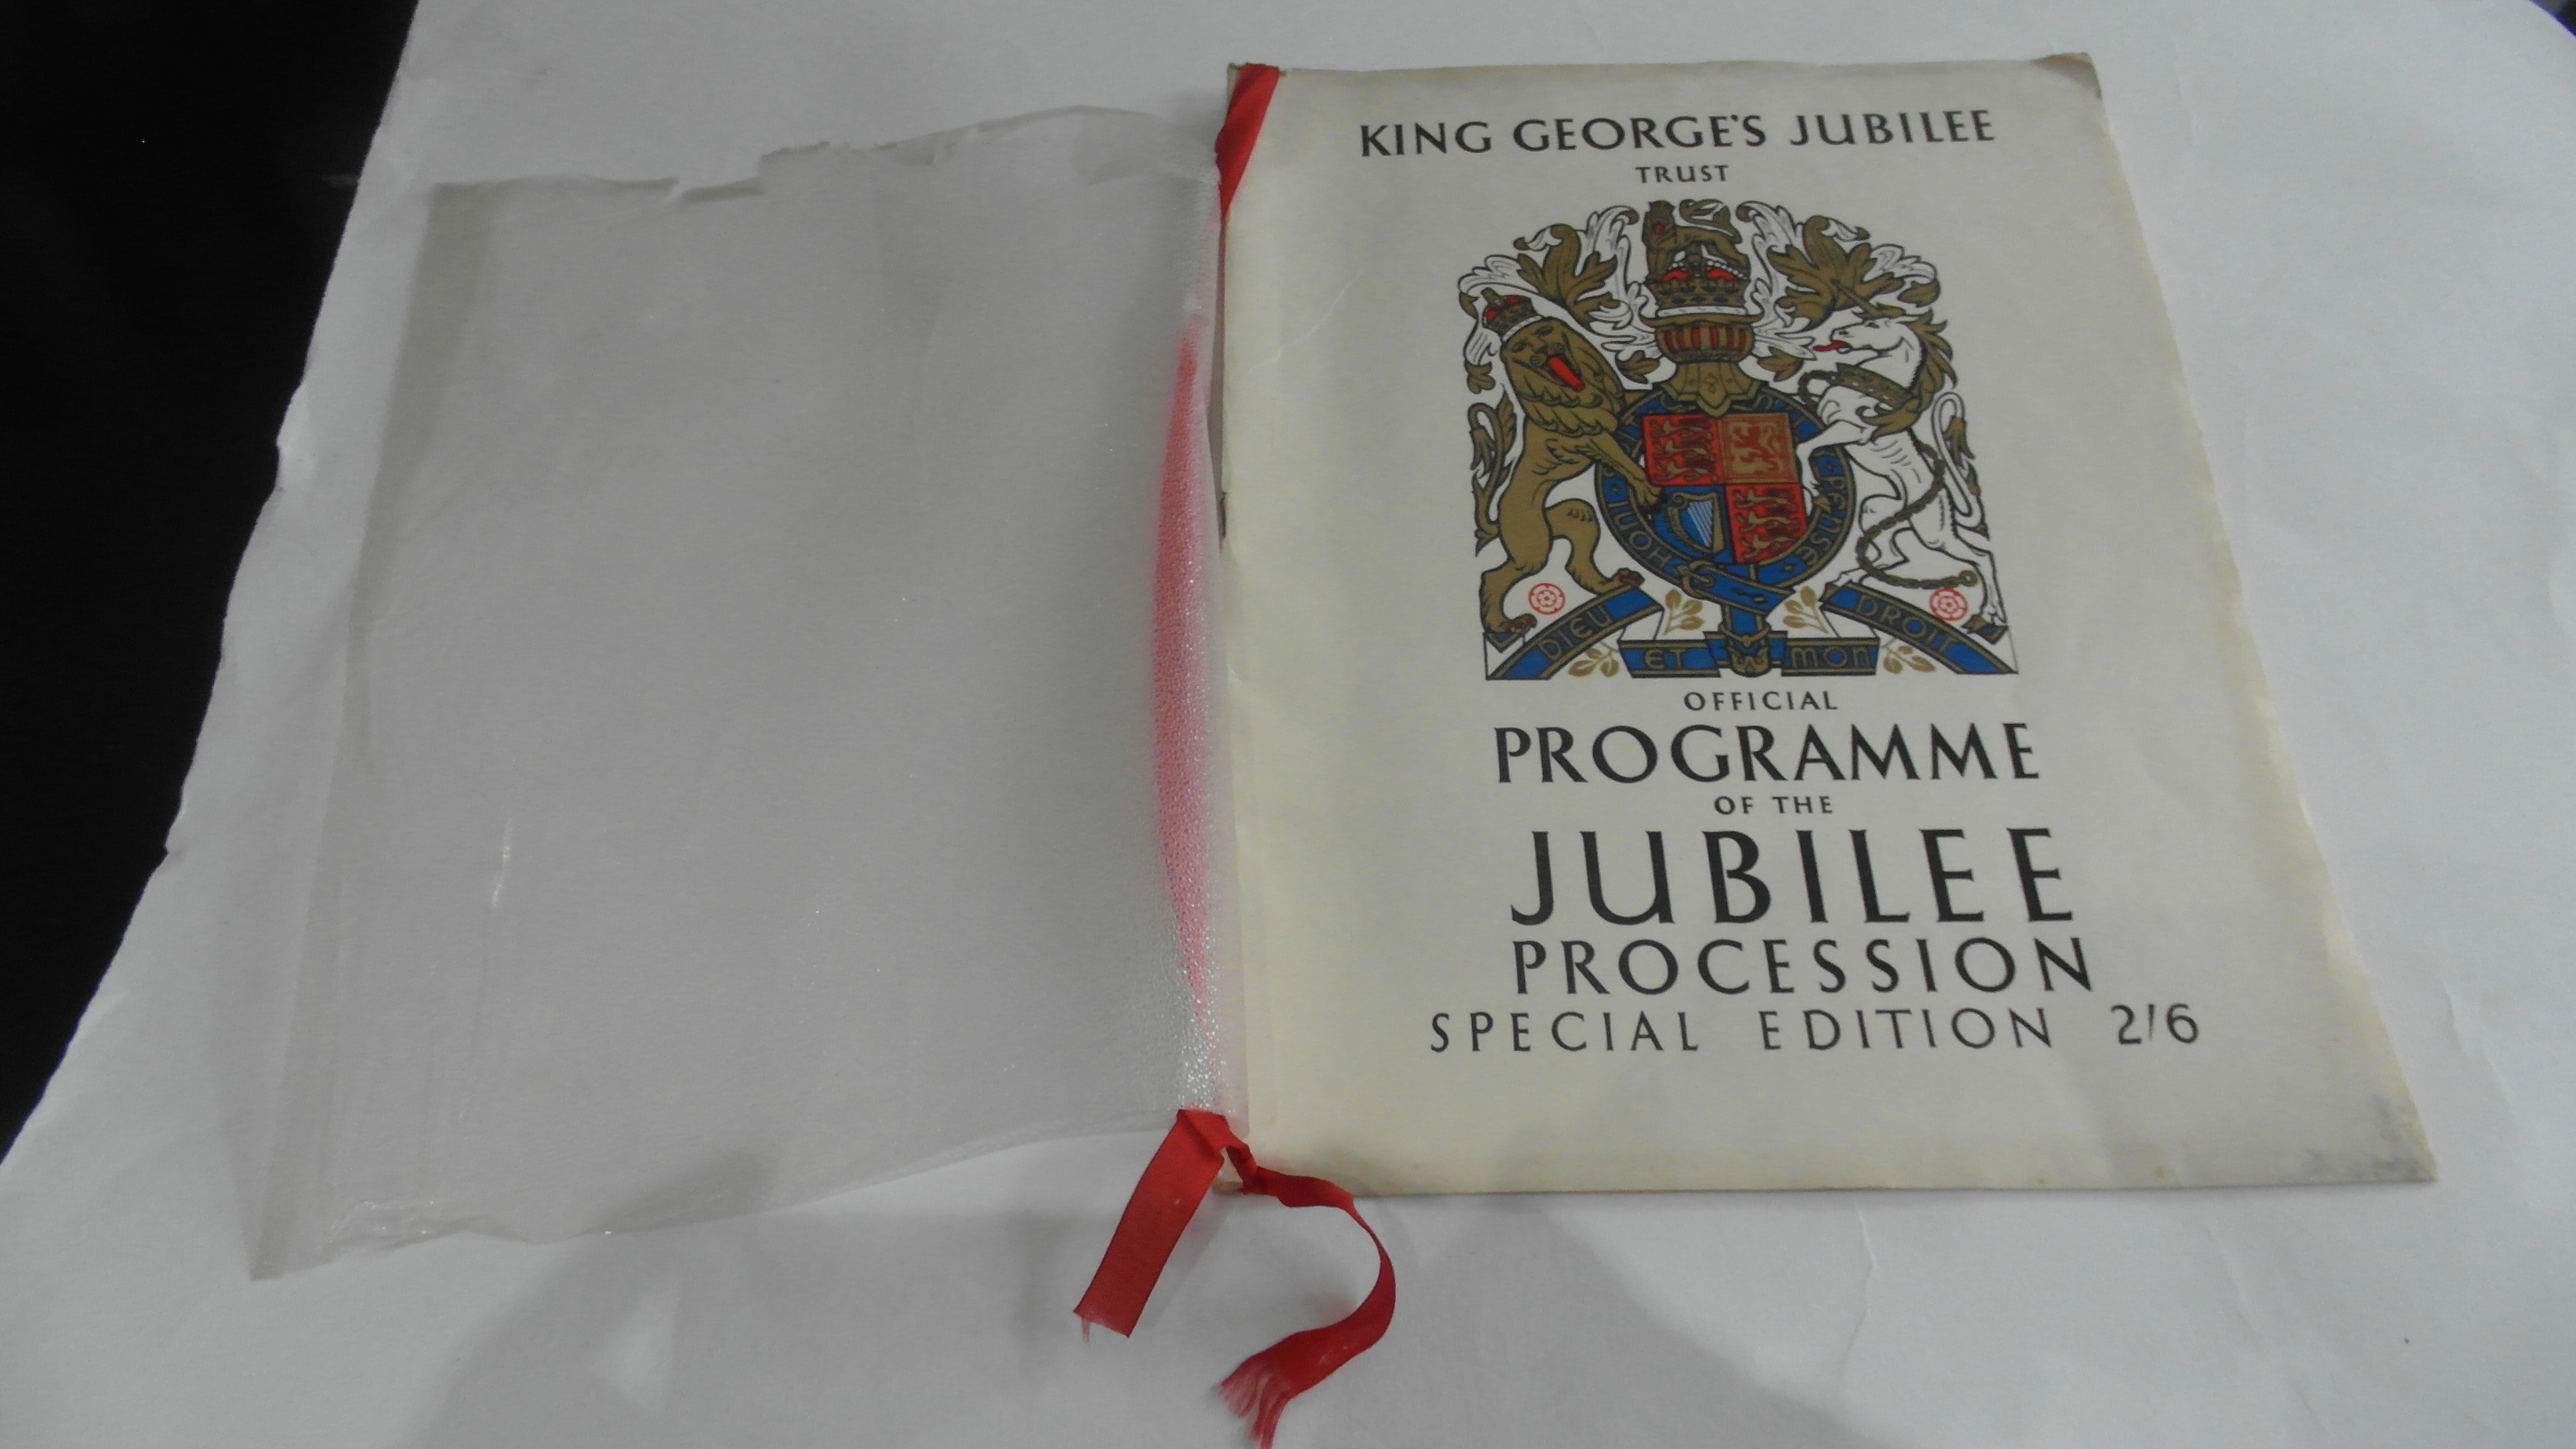 1935 KING GEORGE V JUBILEE PROCESSION PROGRAM - SPECIAL EDITION - Image 2 of 9